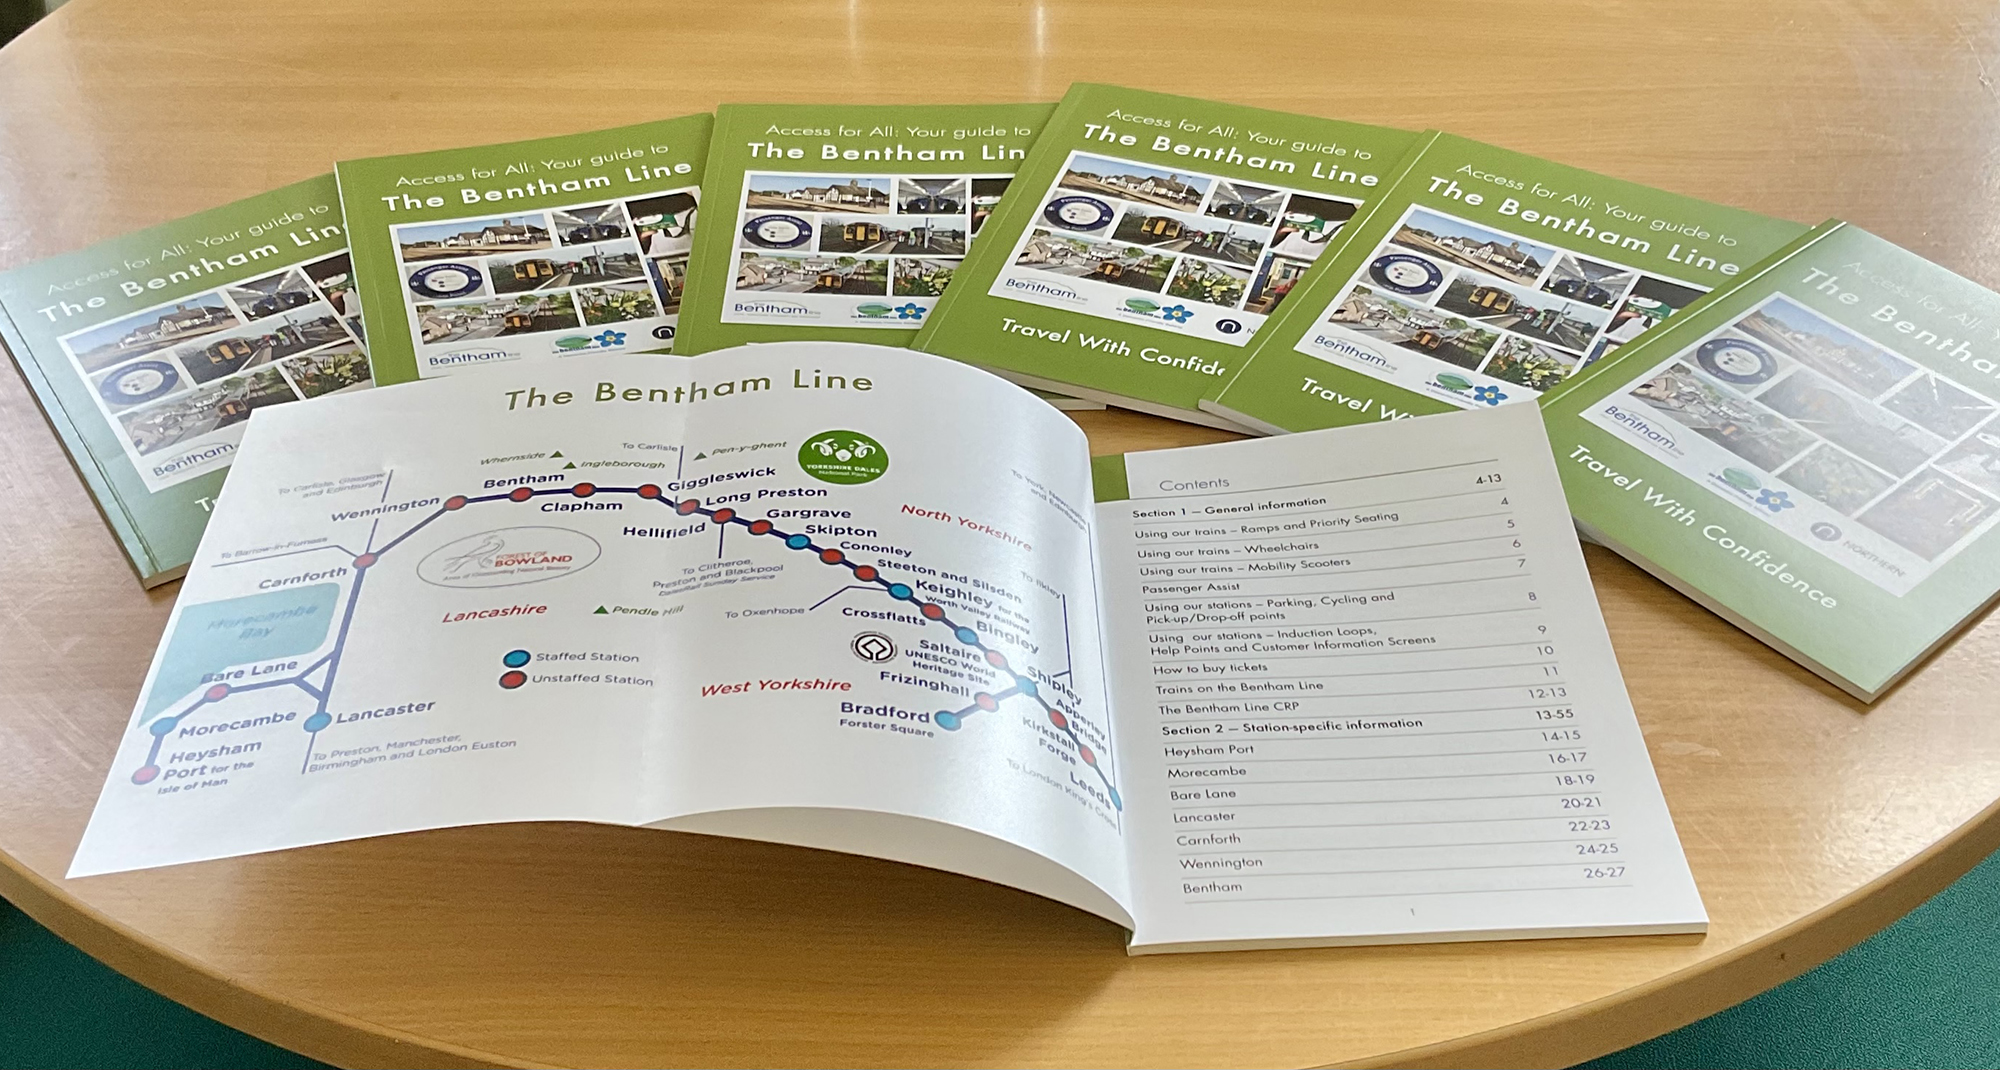 The Bentham Line booklet showing the fold out map of the line